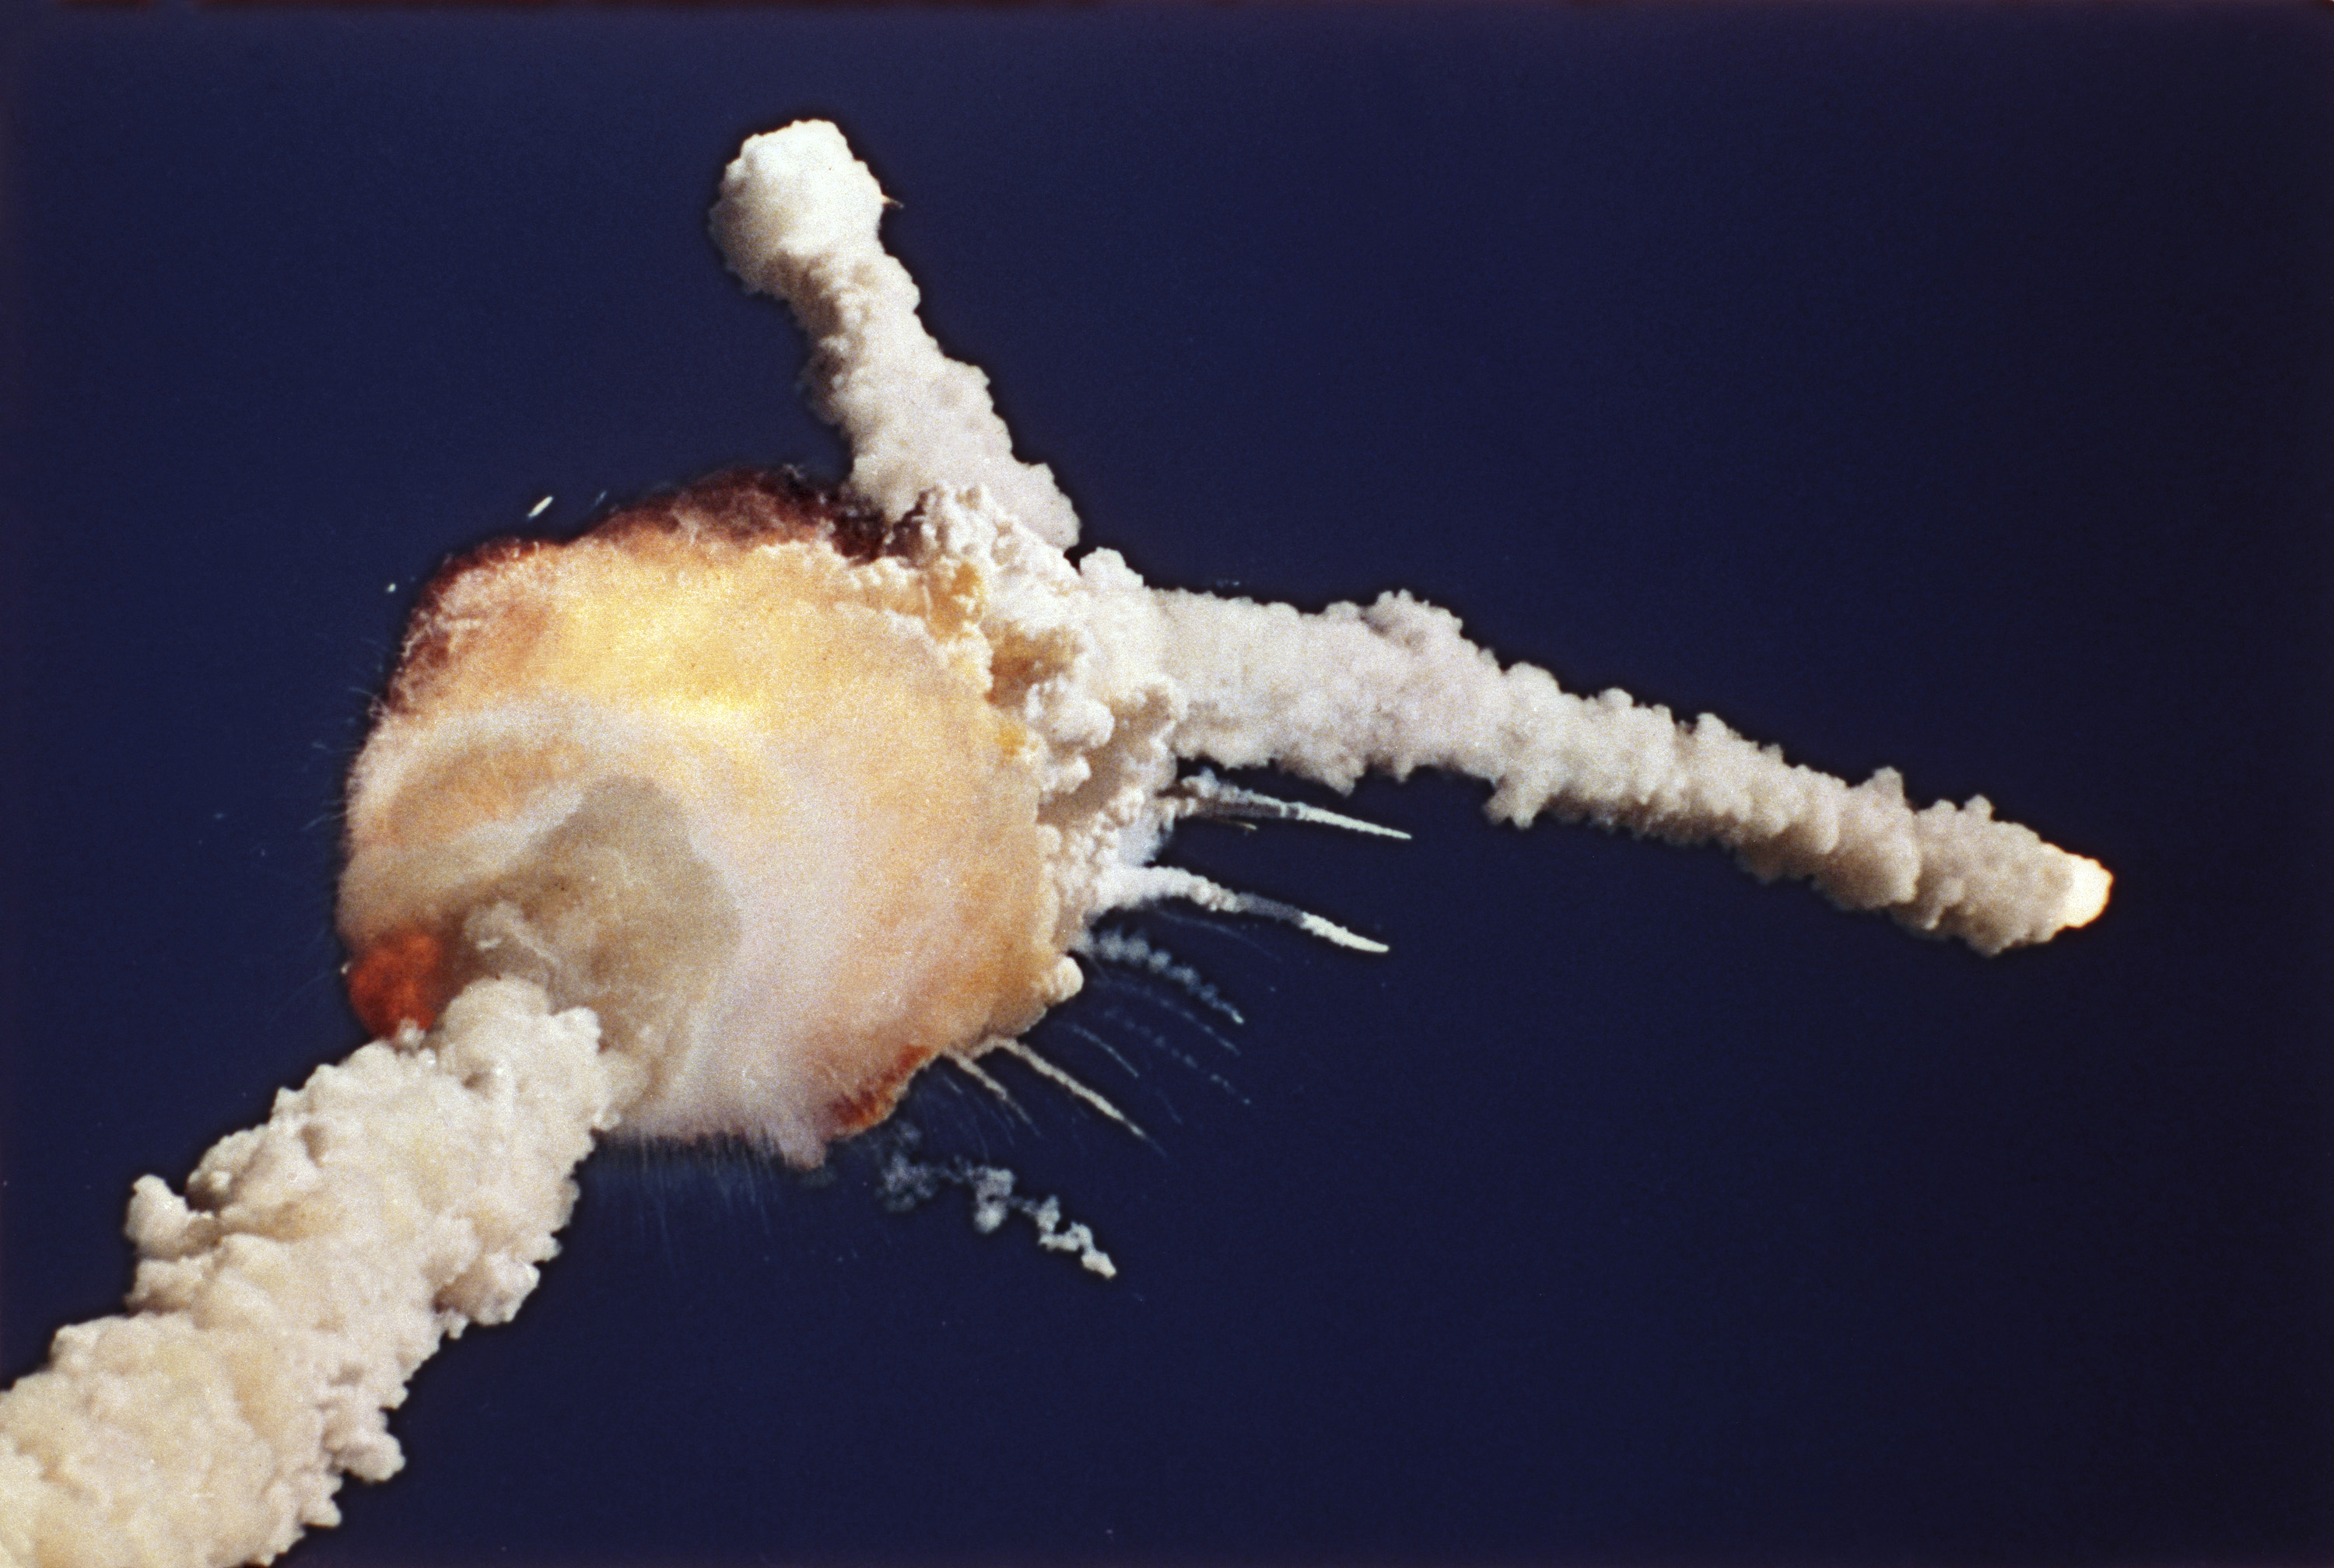 challenger nasa bodies recovered